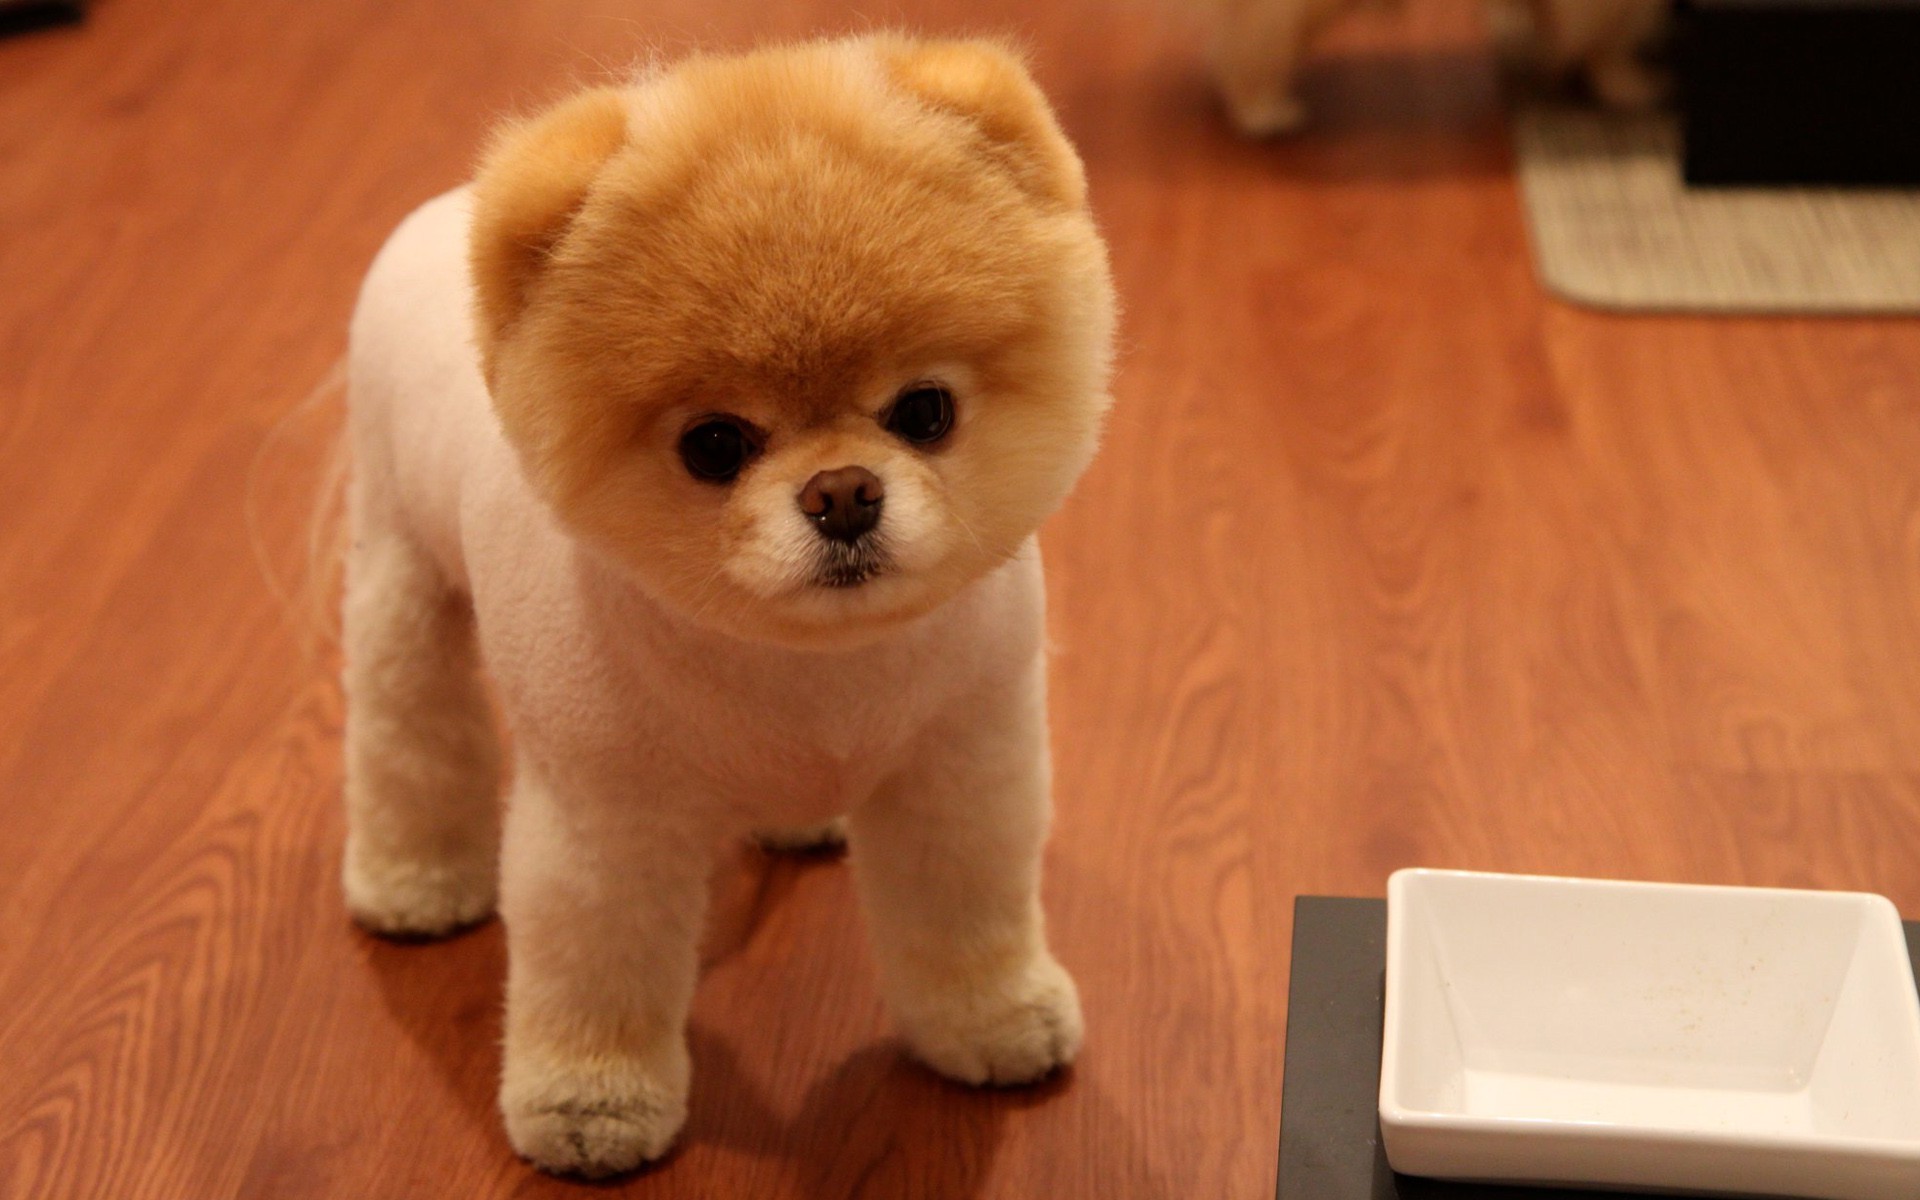 Teddy Hund Boo Absolutely perfect Teddy Bear Pom! This is why I